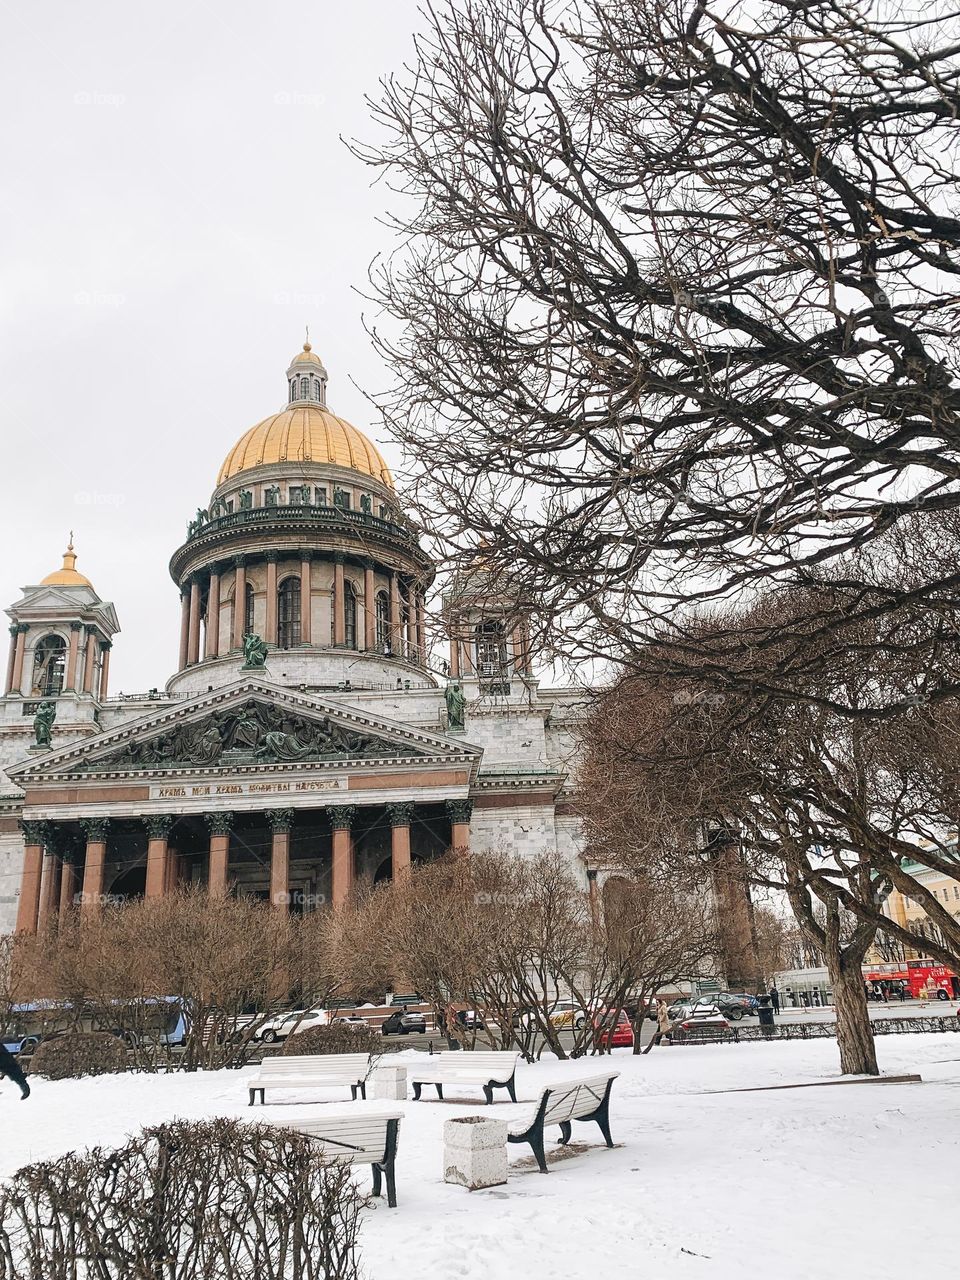 View of St. Isaac's Cathedral in St. Petersburg in winter